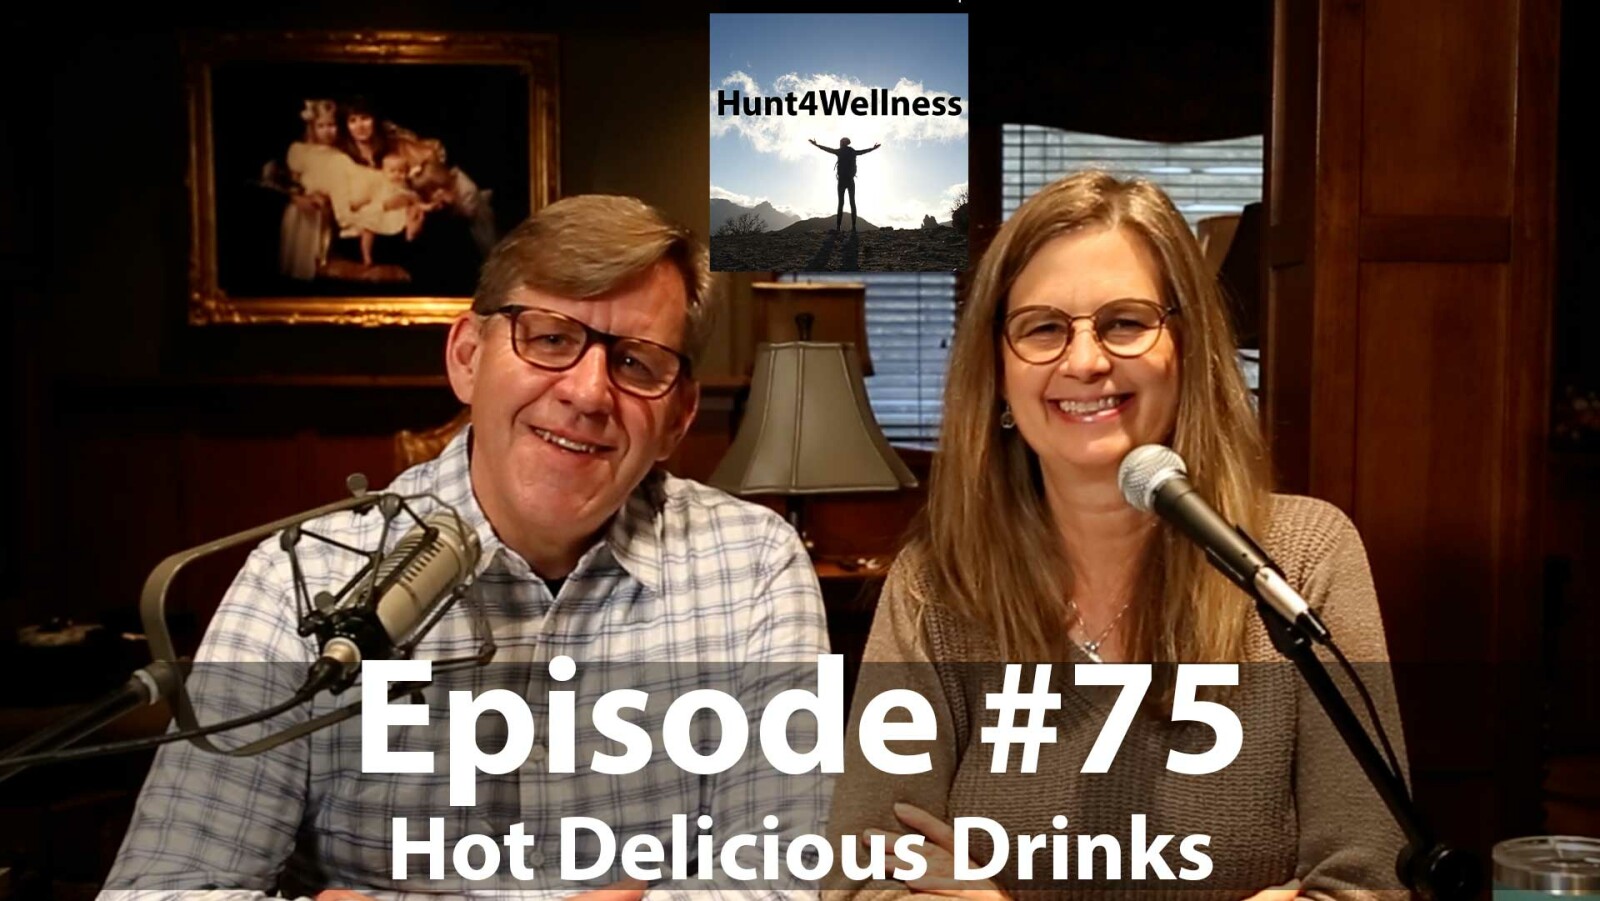 Episode #75 - Hot Delicious Drinks